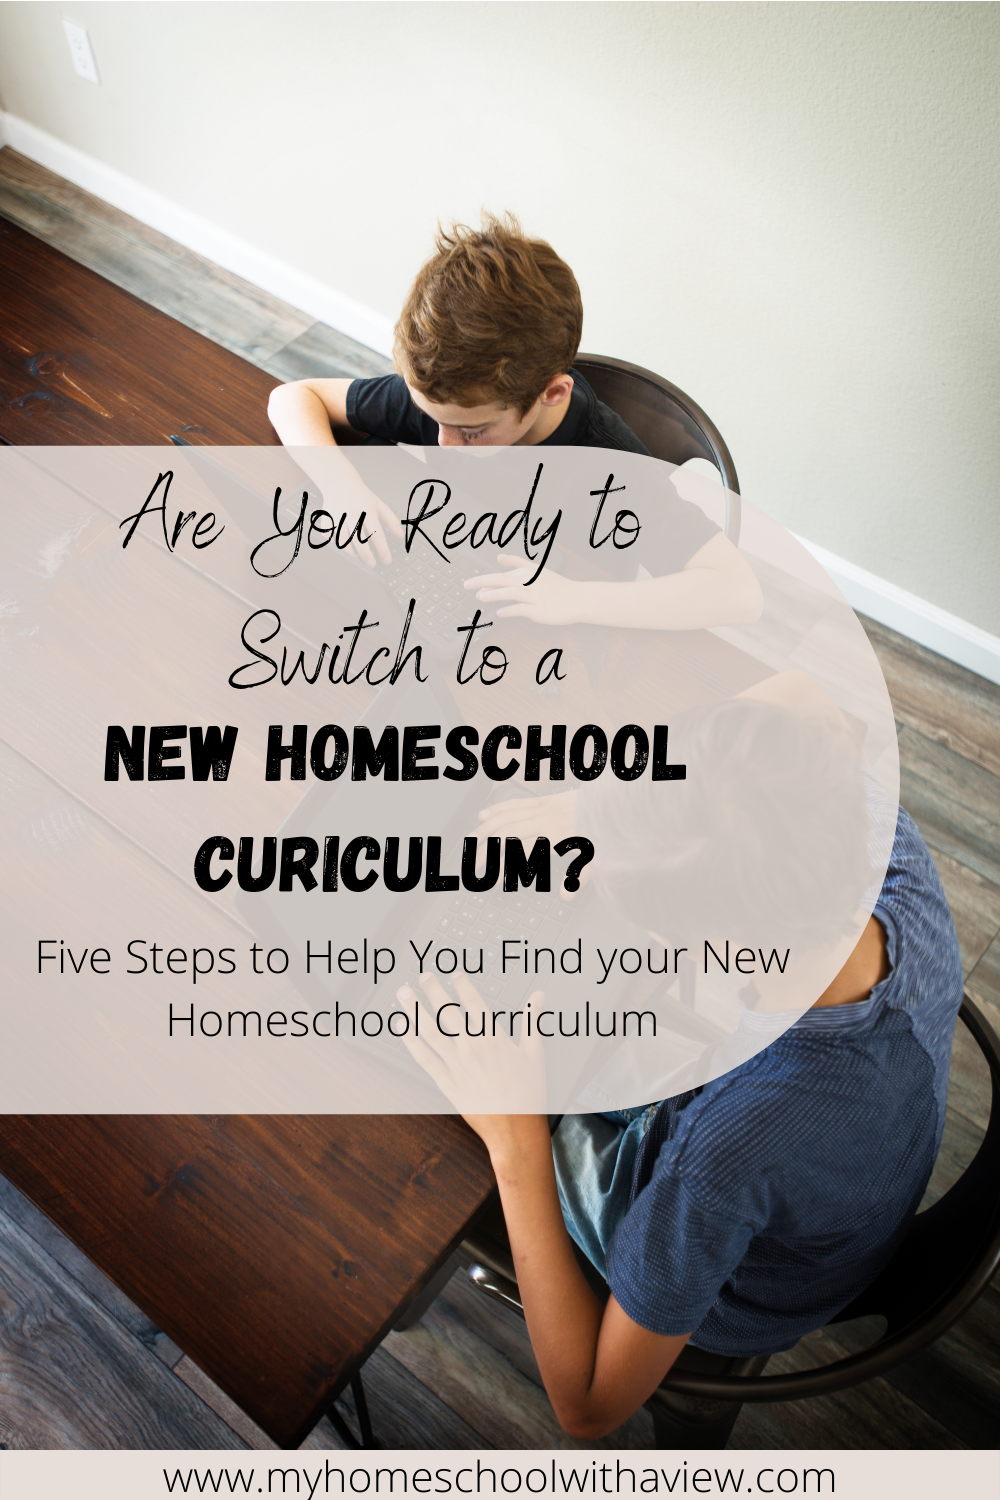 Are you ready for a new homeschool curriculum?